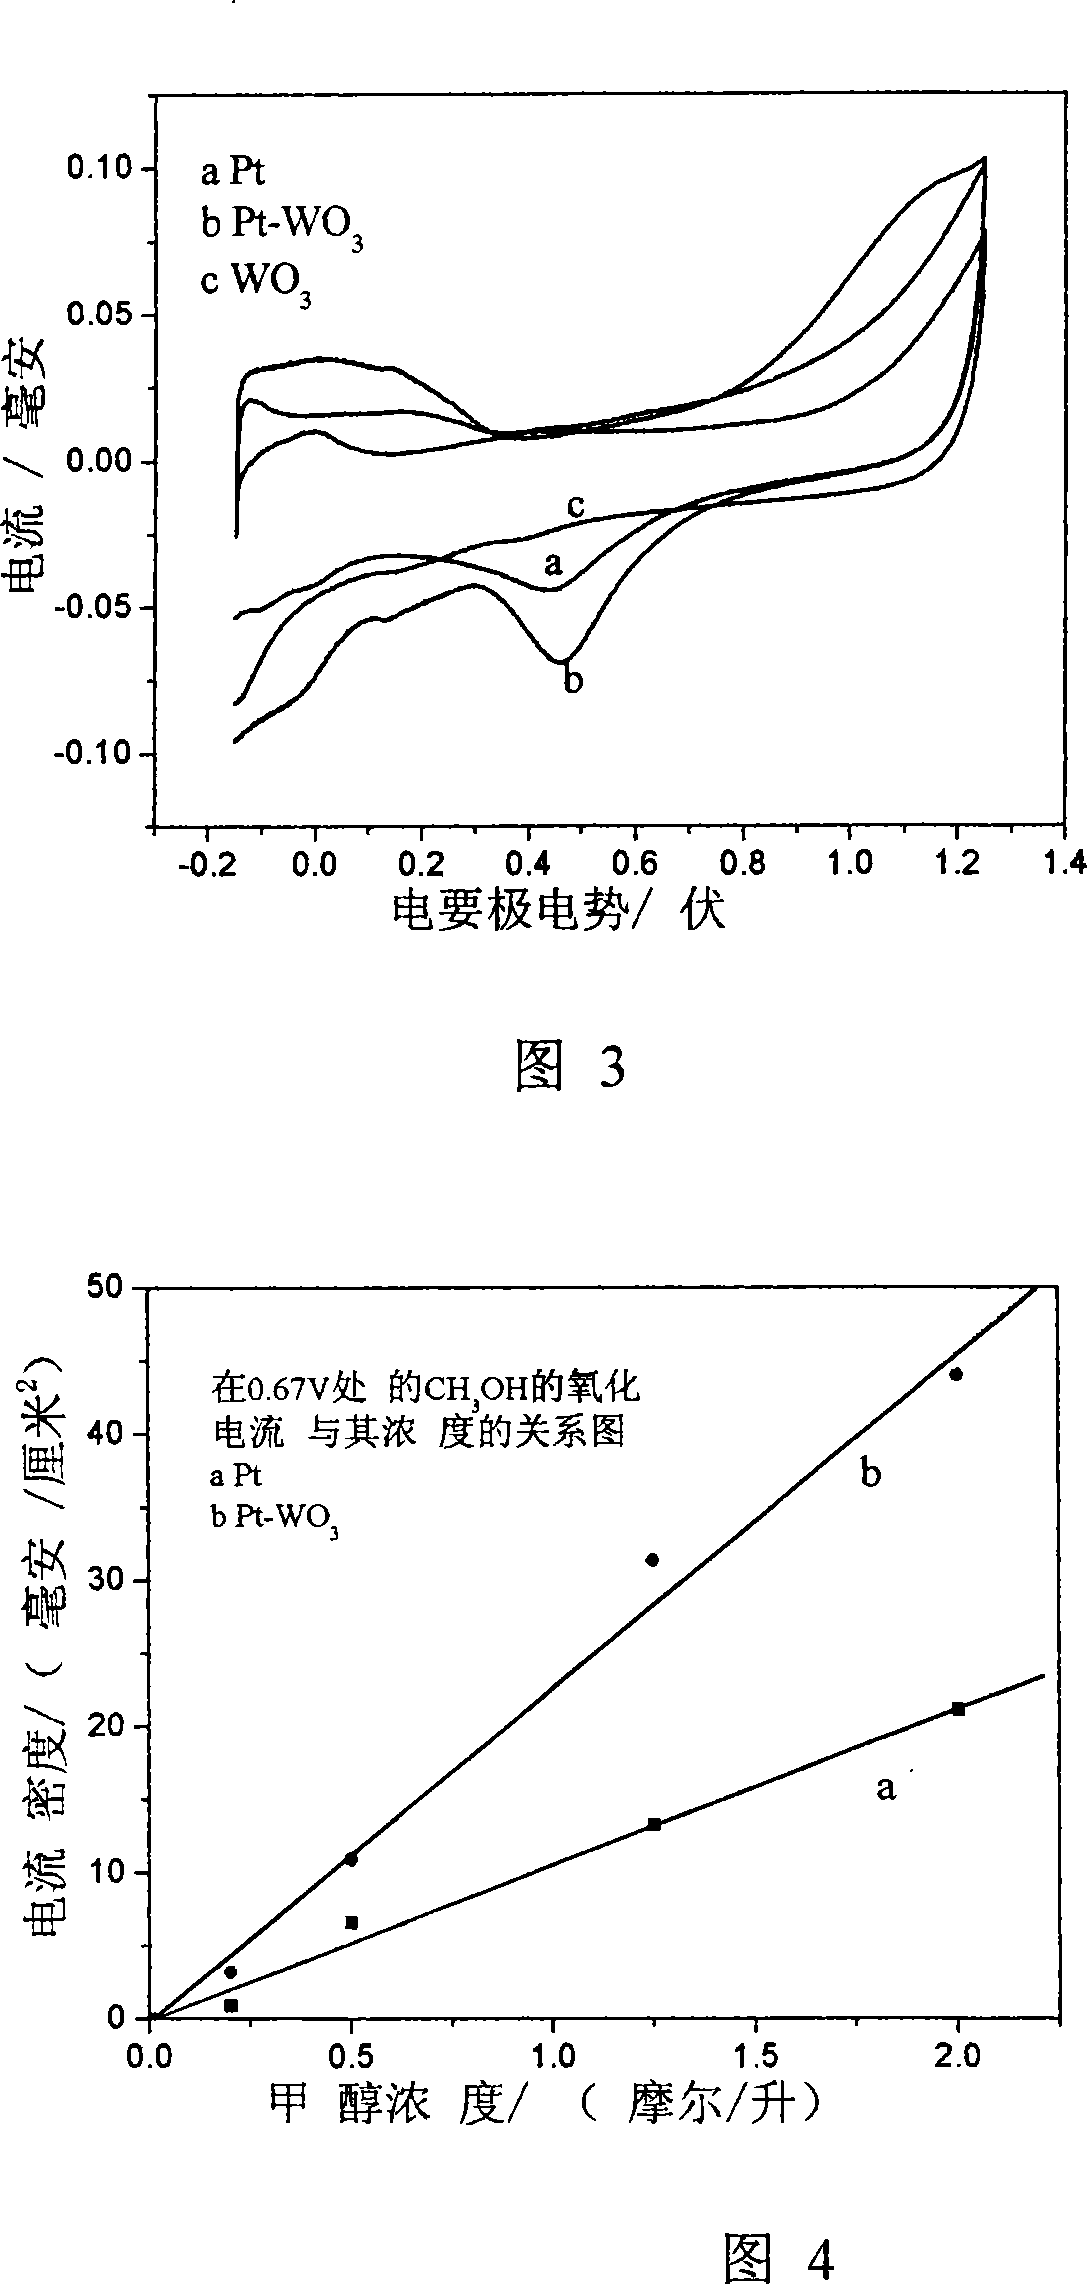 Direct methanol fuel battery anode catalyst and method for producing the same